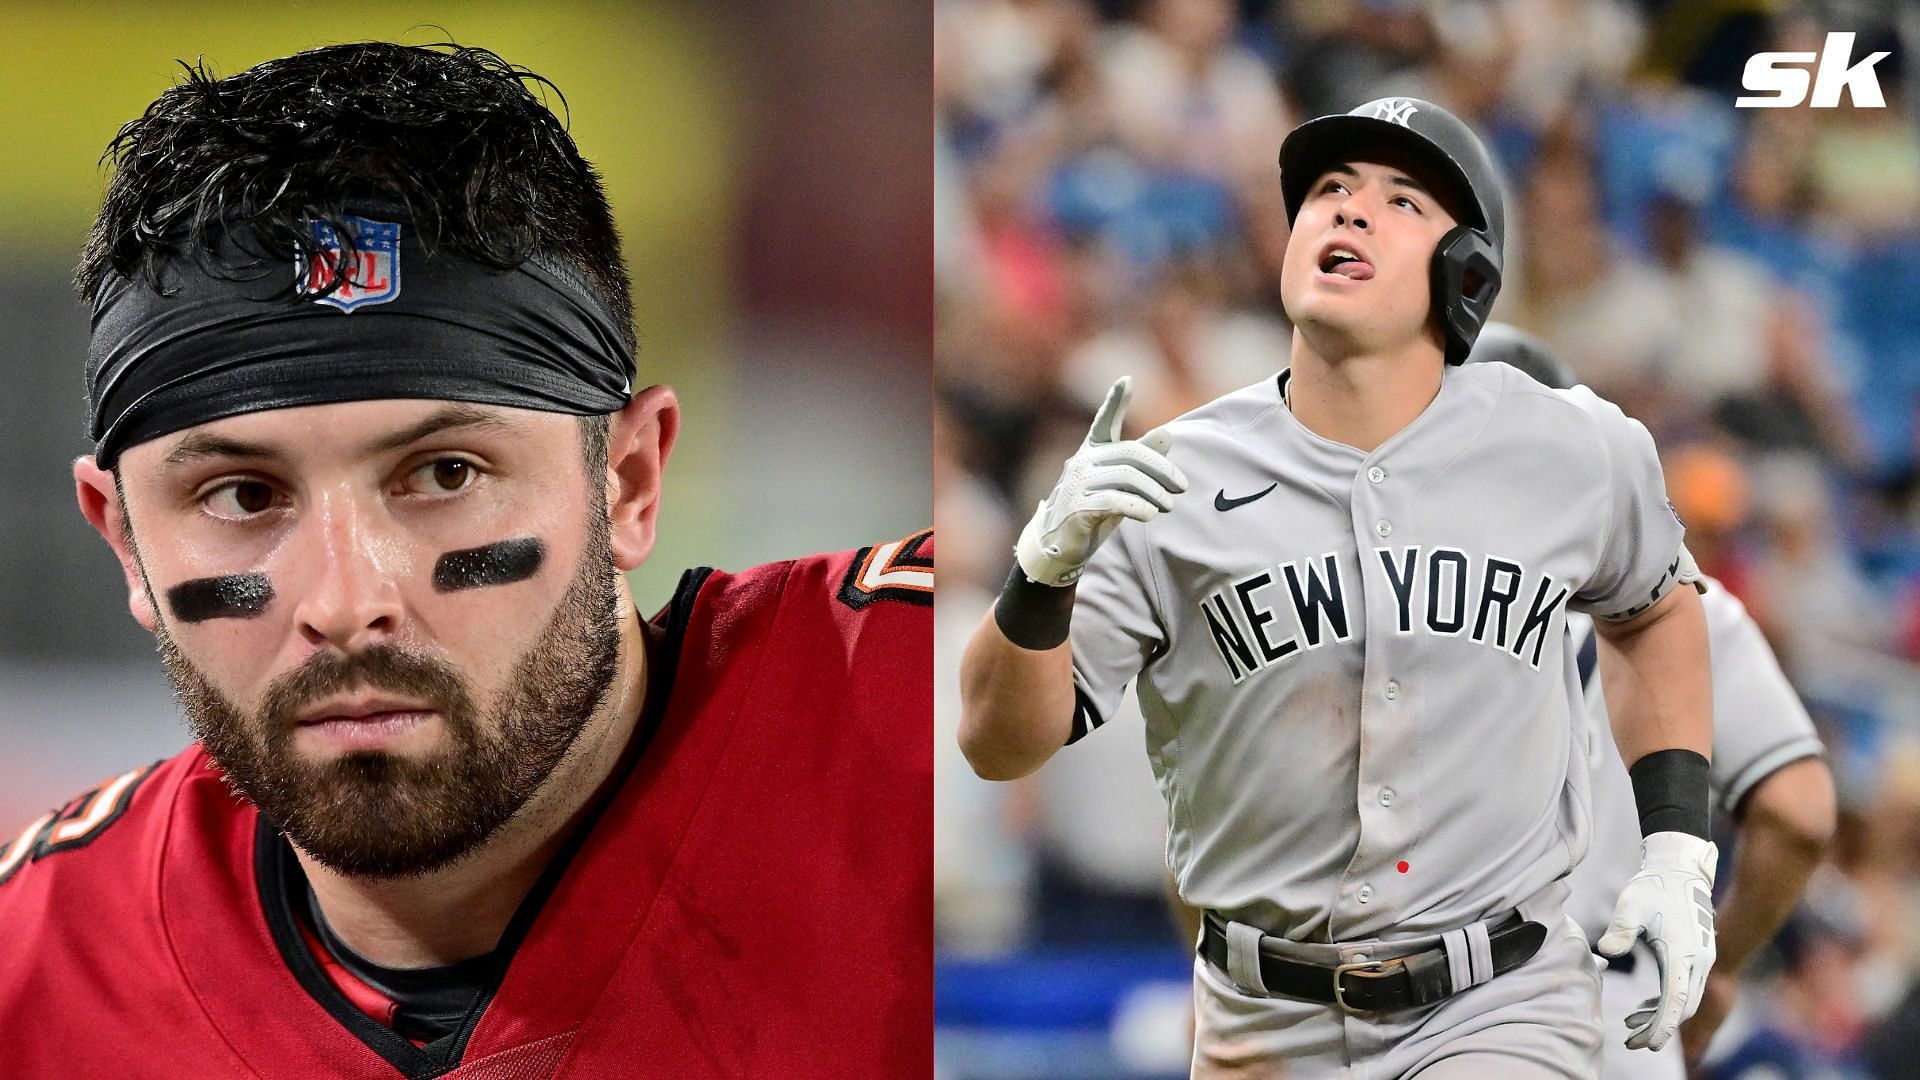 Yankees rookie Anthony Volpe was spotted at a hockey game alongside Bucs QB Baker Mayfield